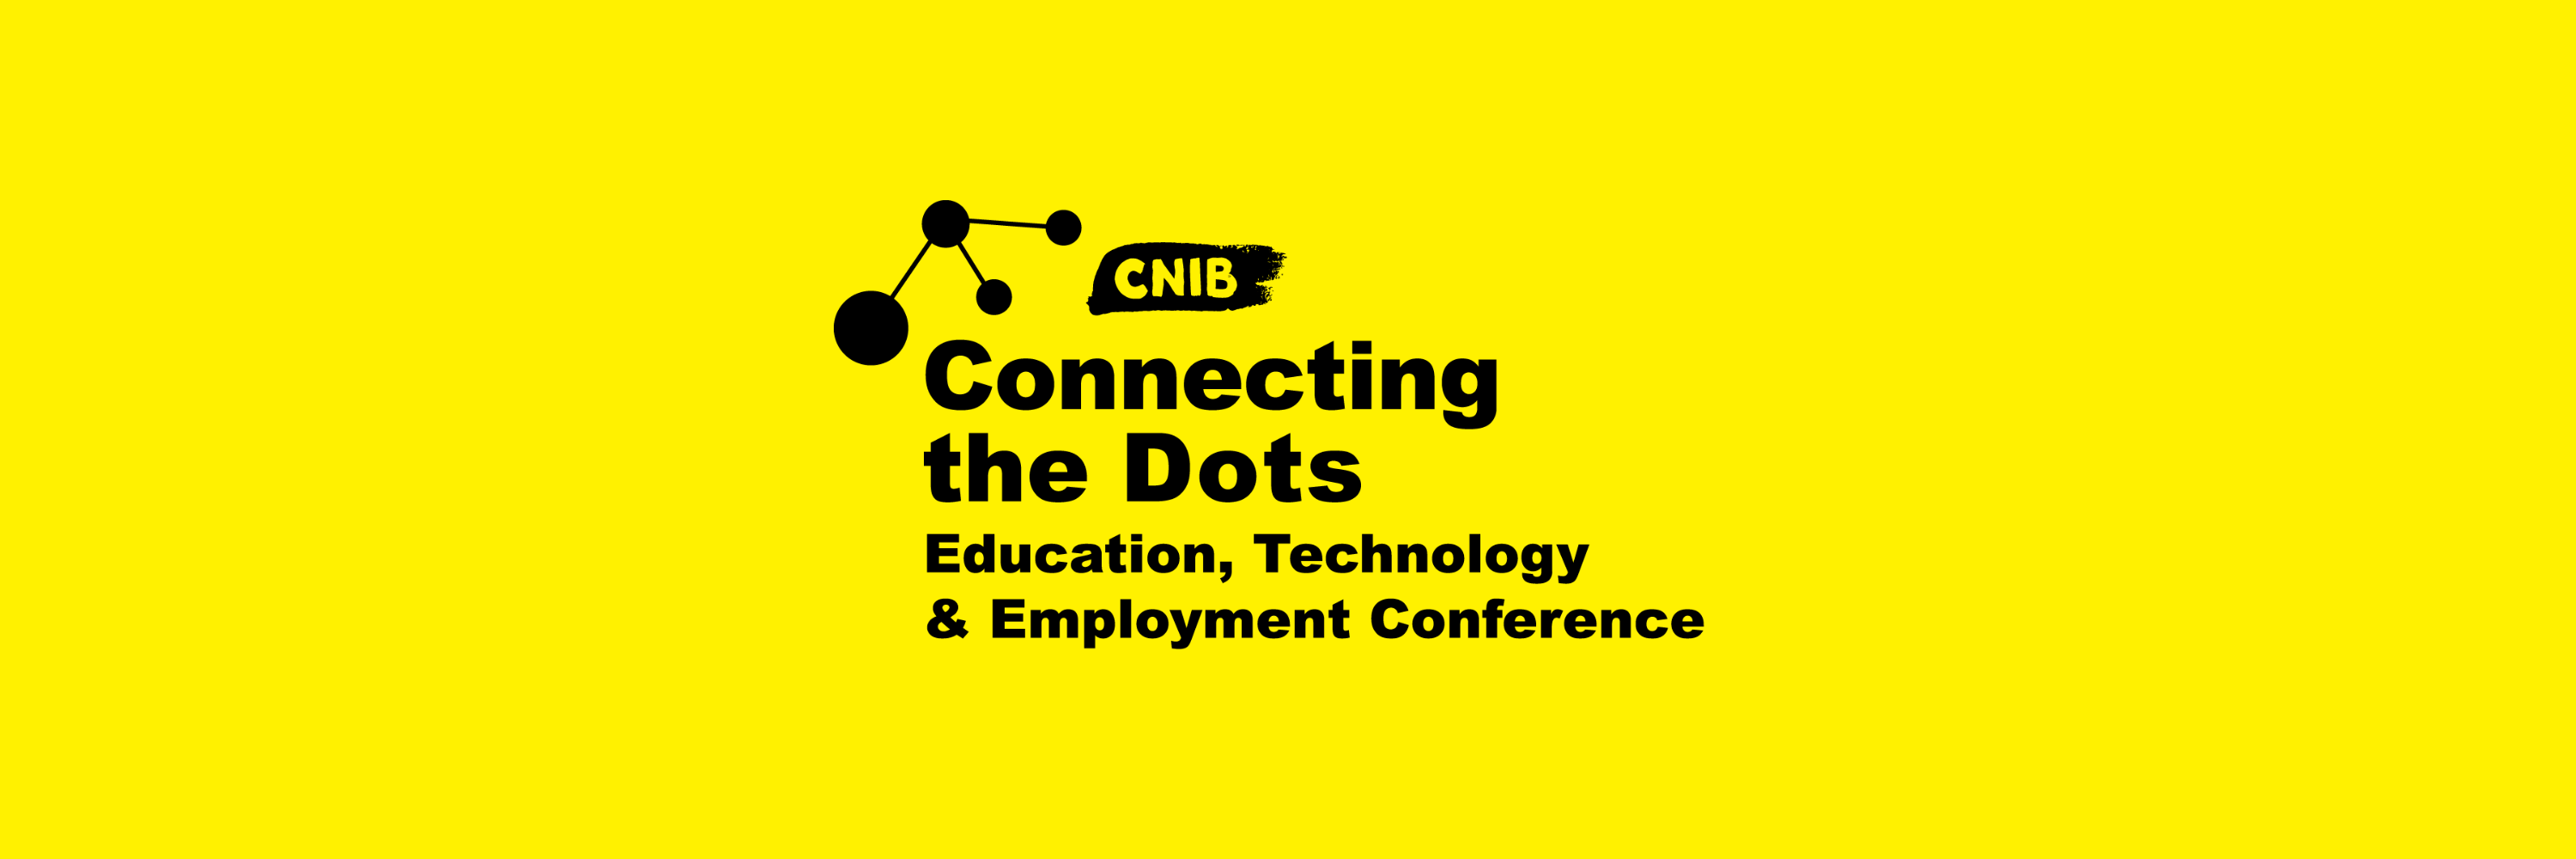 CNIB Connecting the Dots. Education, Technology and Employment Conference 